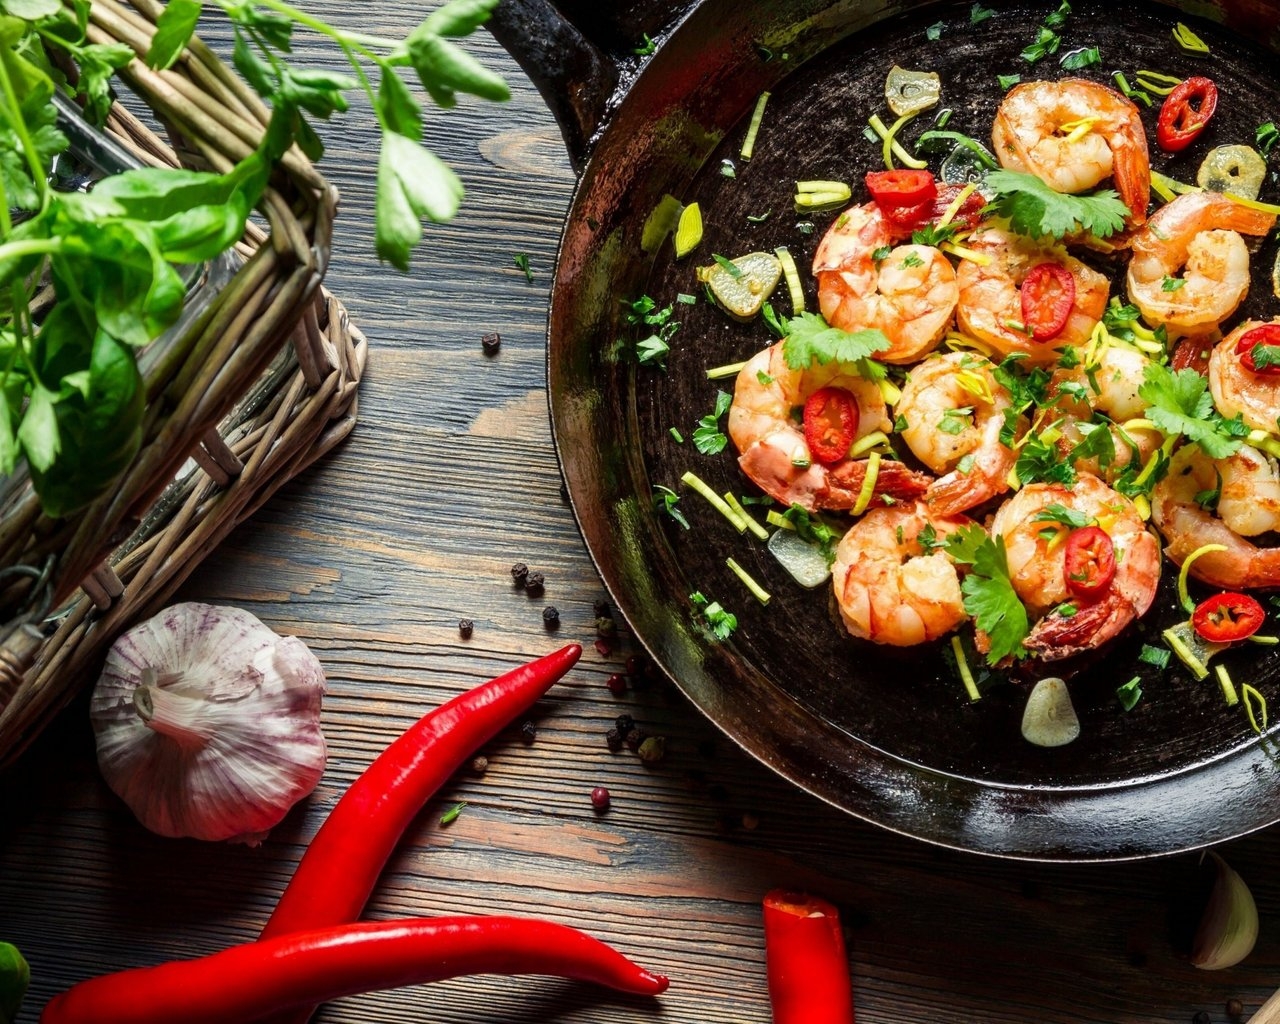 Shrimp with Pepper Chili Garlic Herbs for 1280 x 1024 resolution